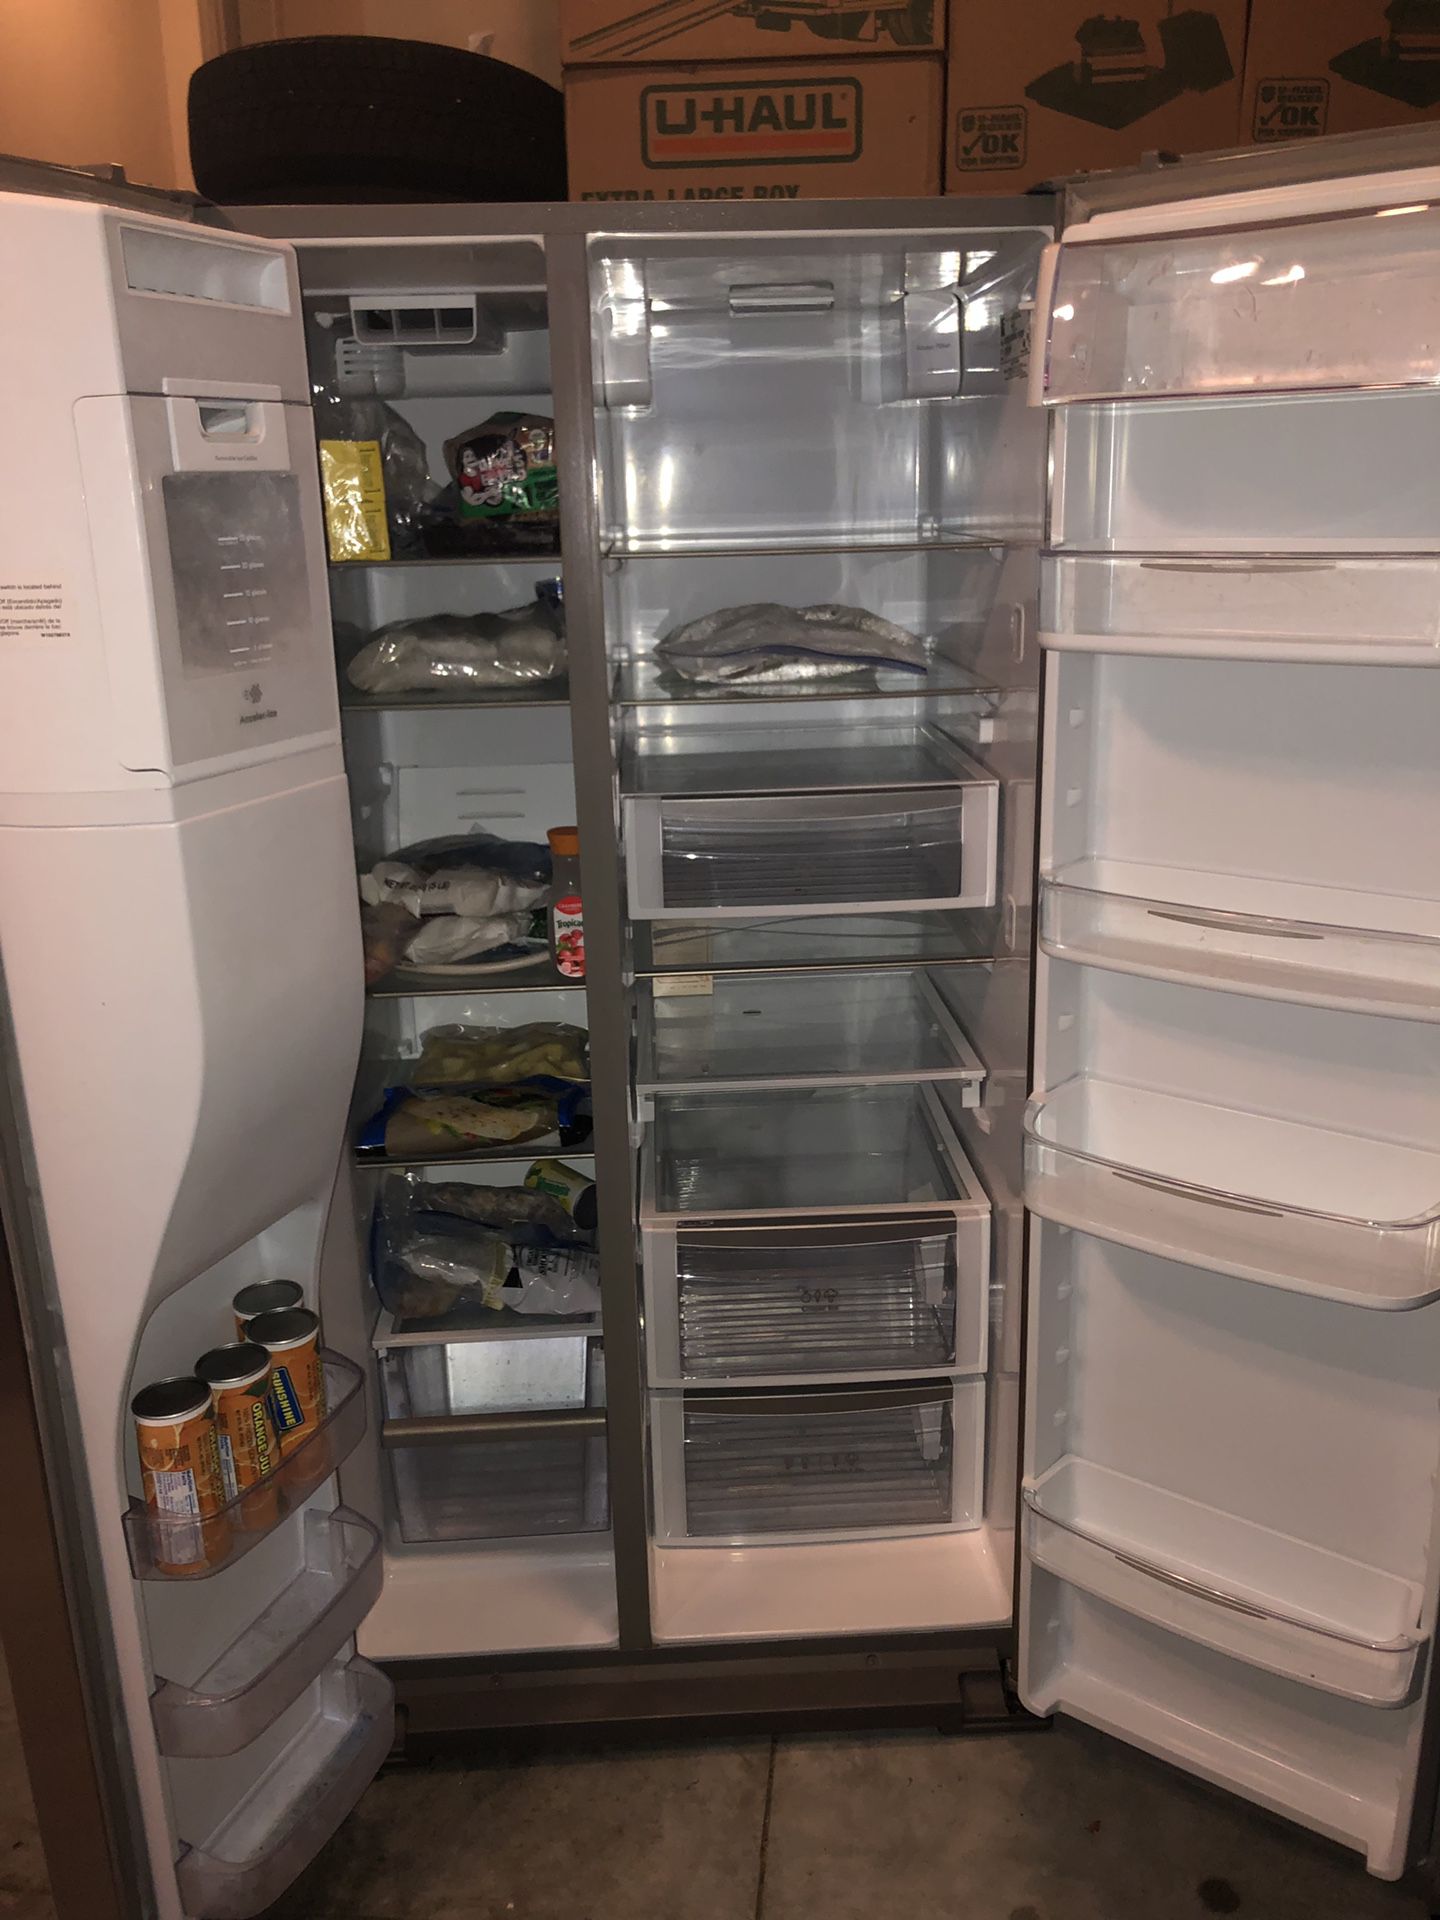 Must sell! Kenmore Elite 26 cu. ft. Side-by-Side Refrigerator